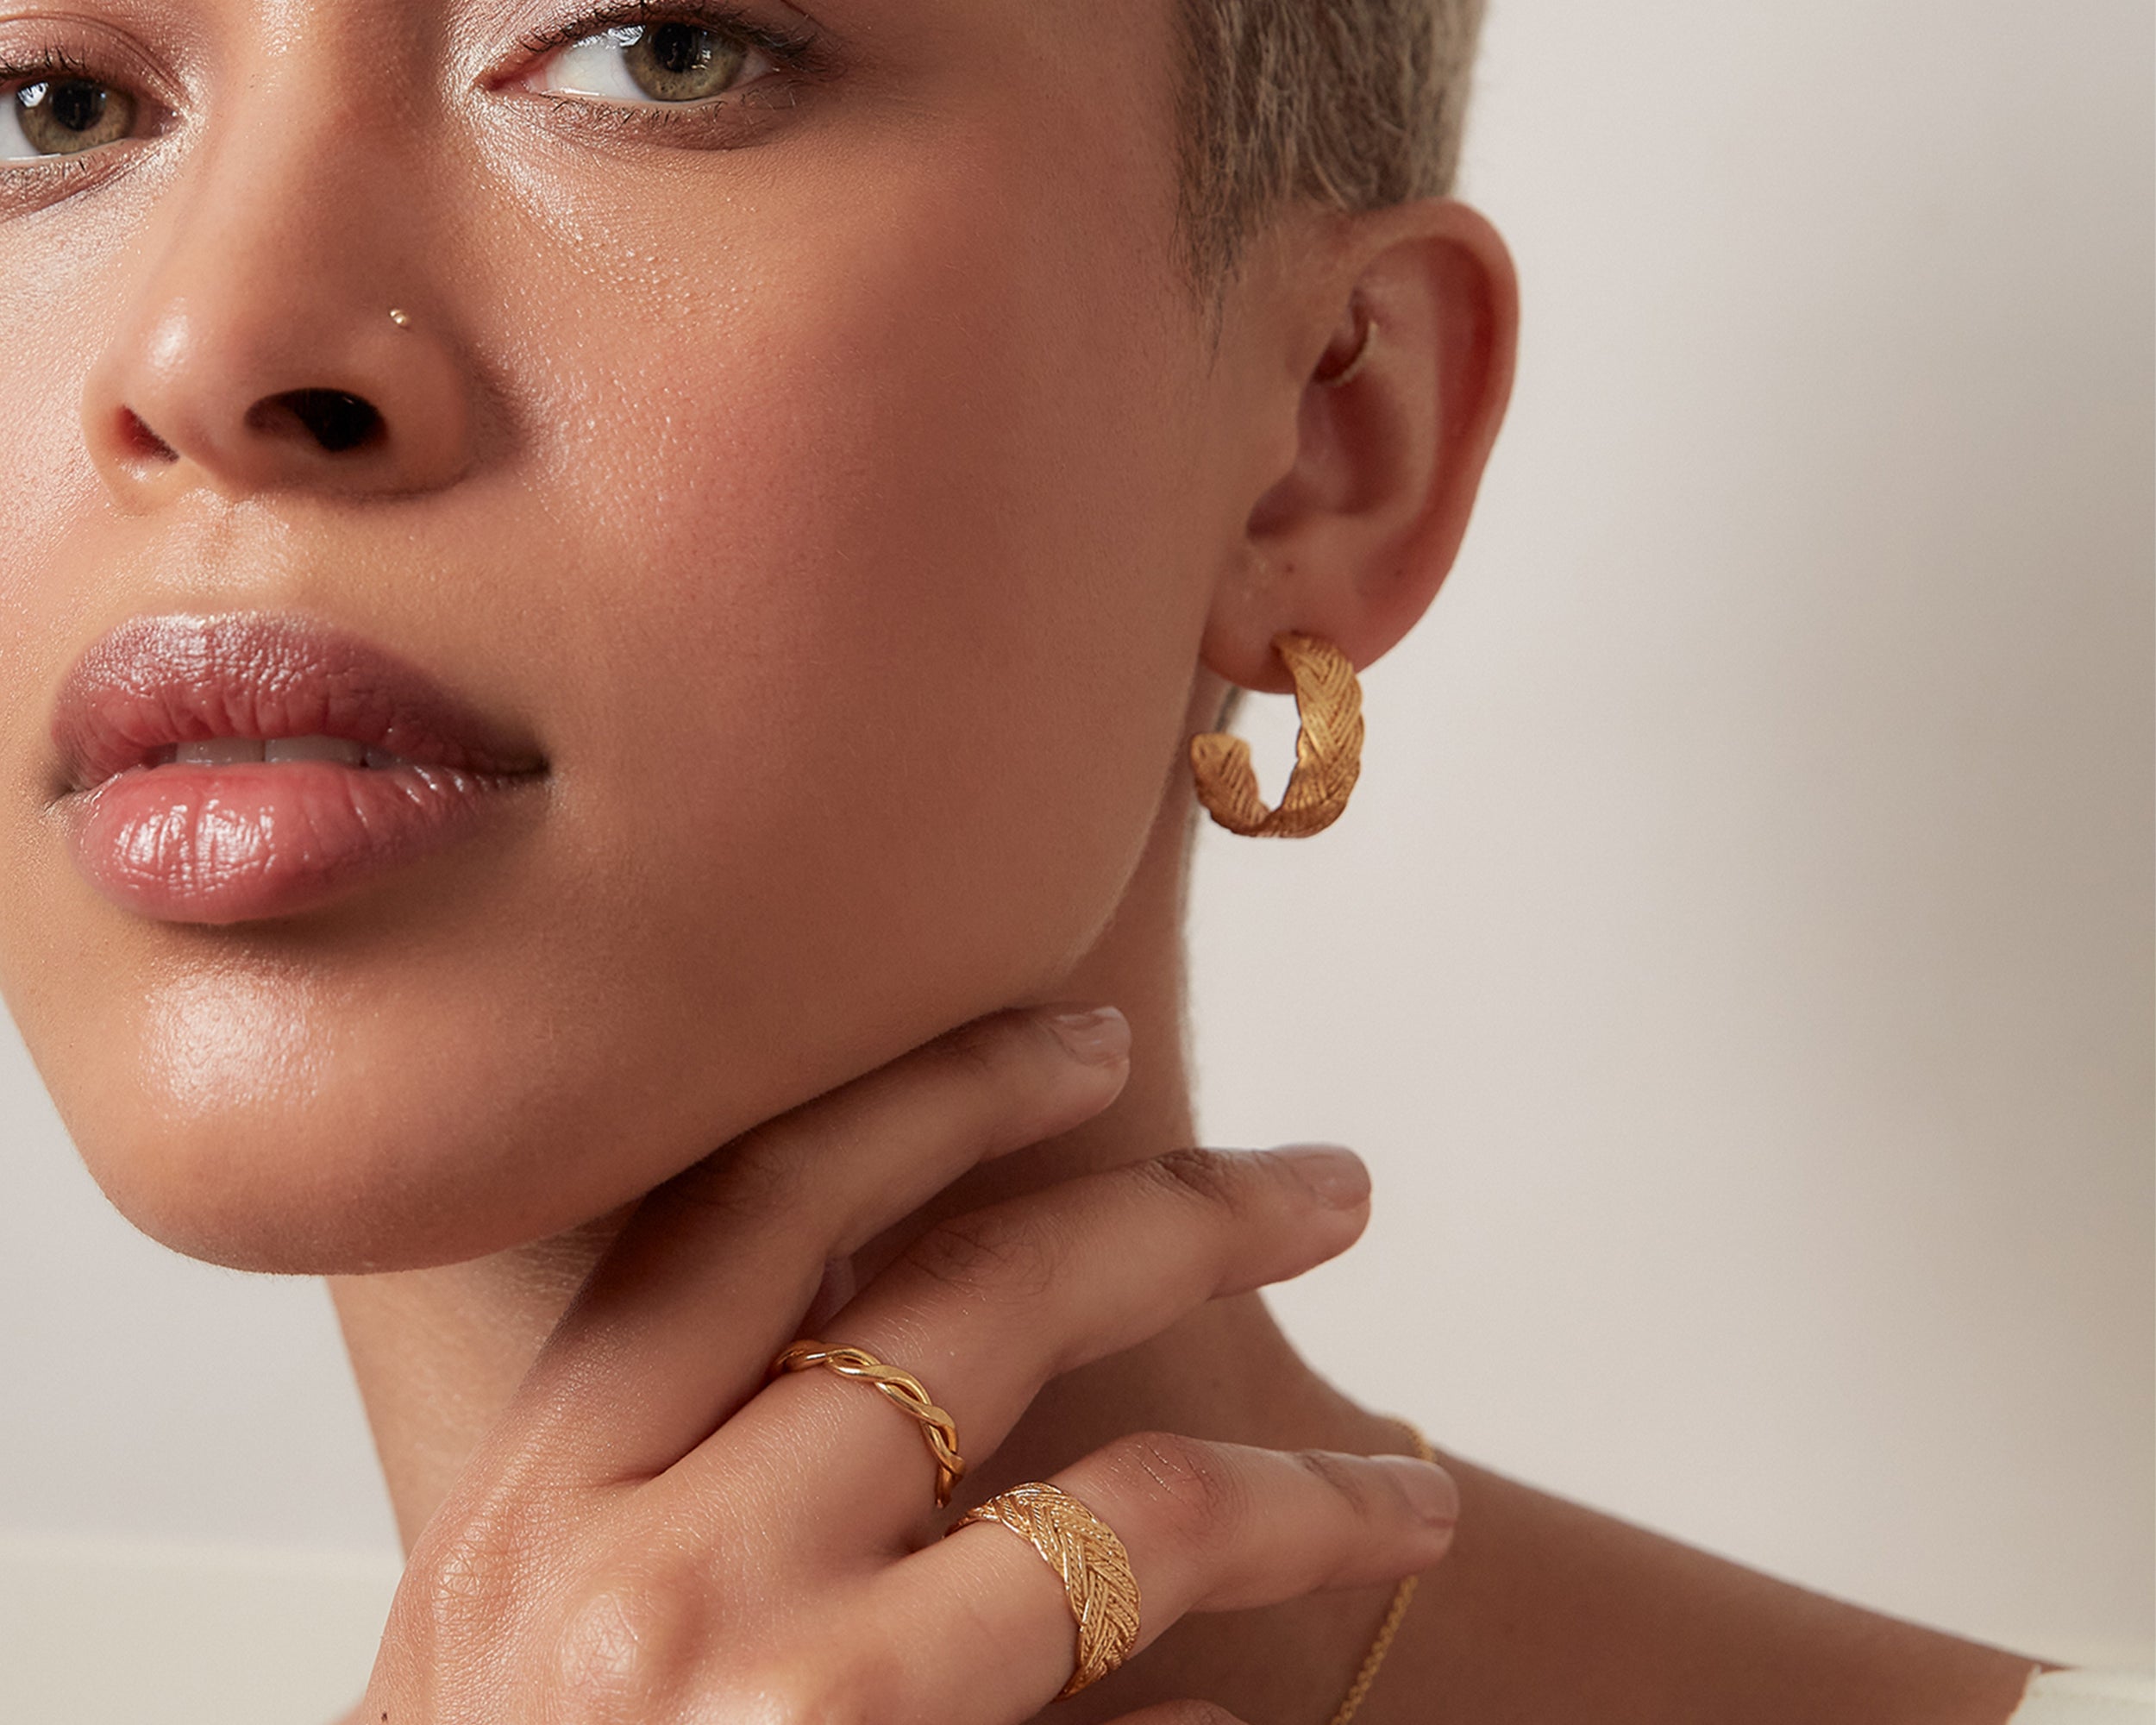 Blair Chain Stacking Ring | Sustainable Jewellery by Ottoman Hands